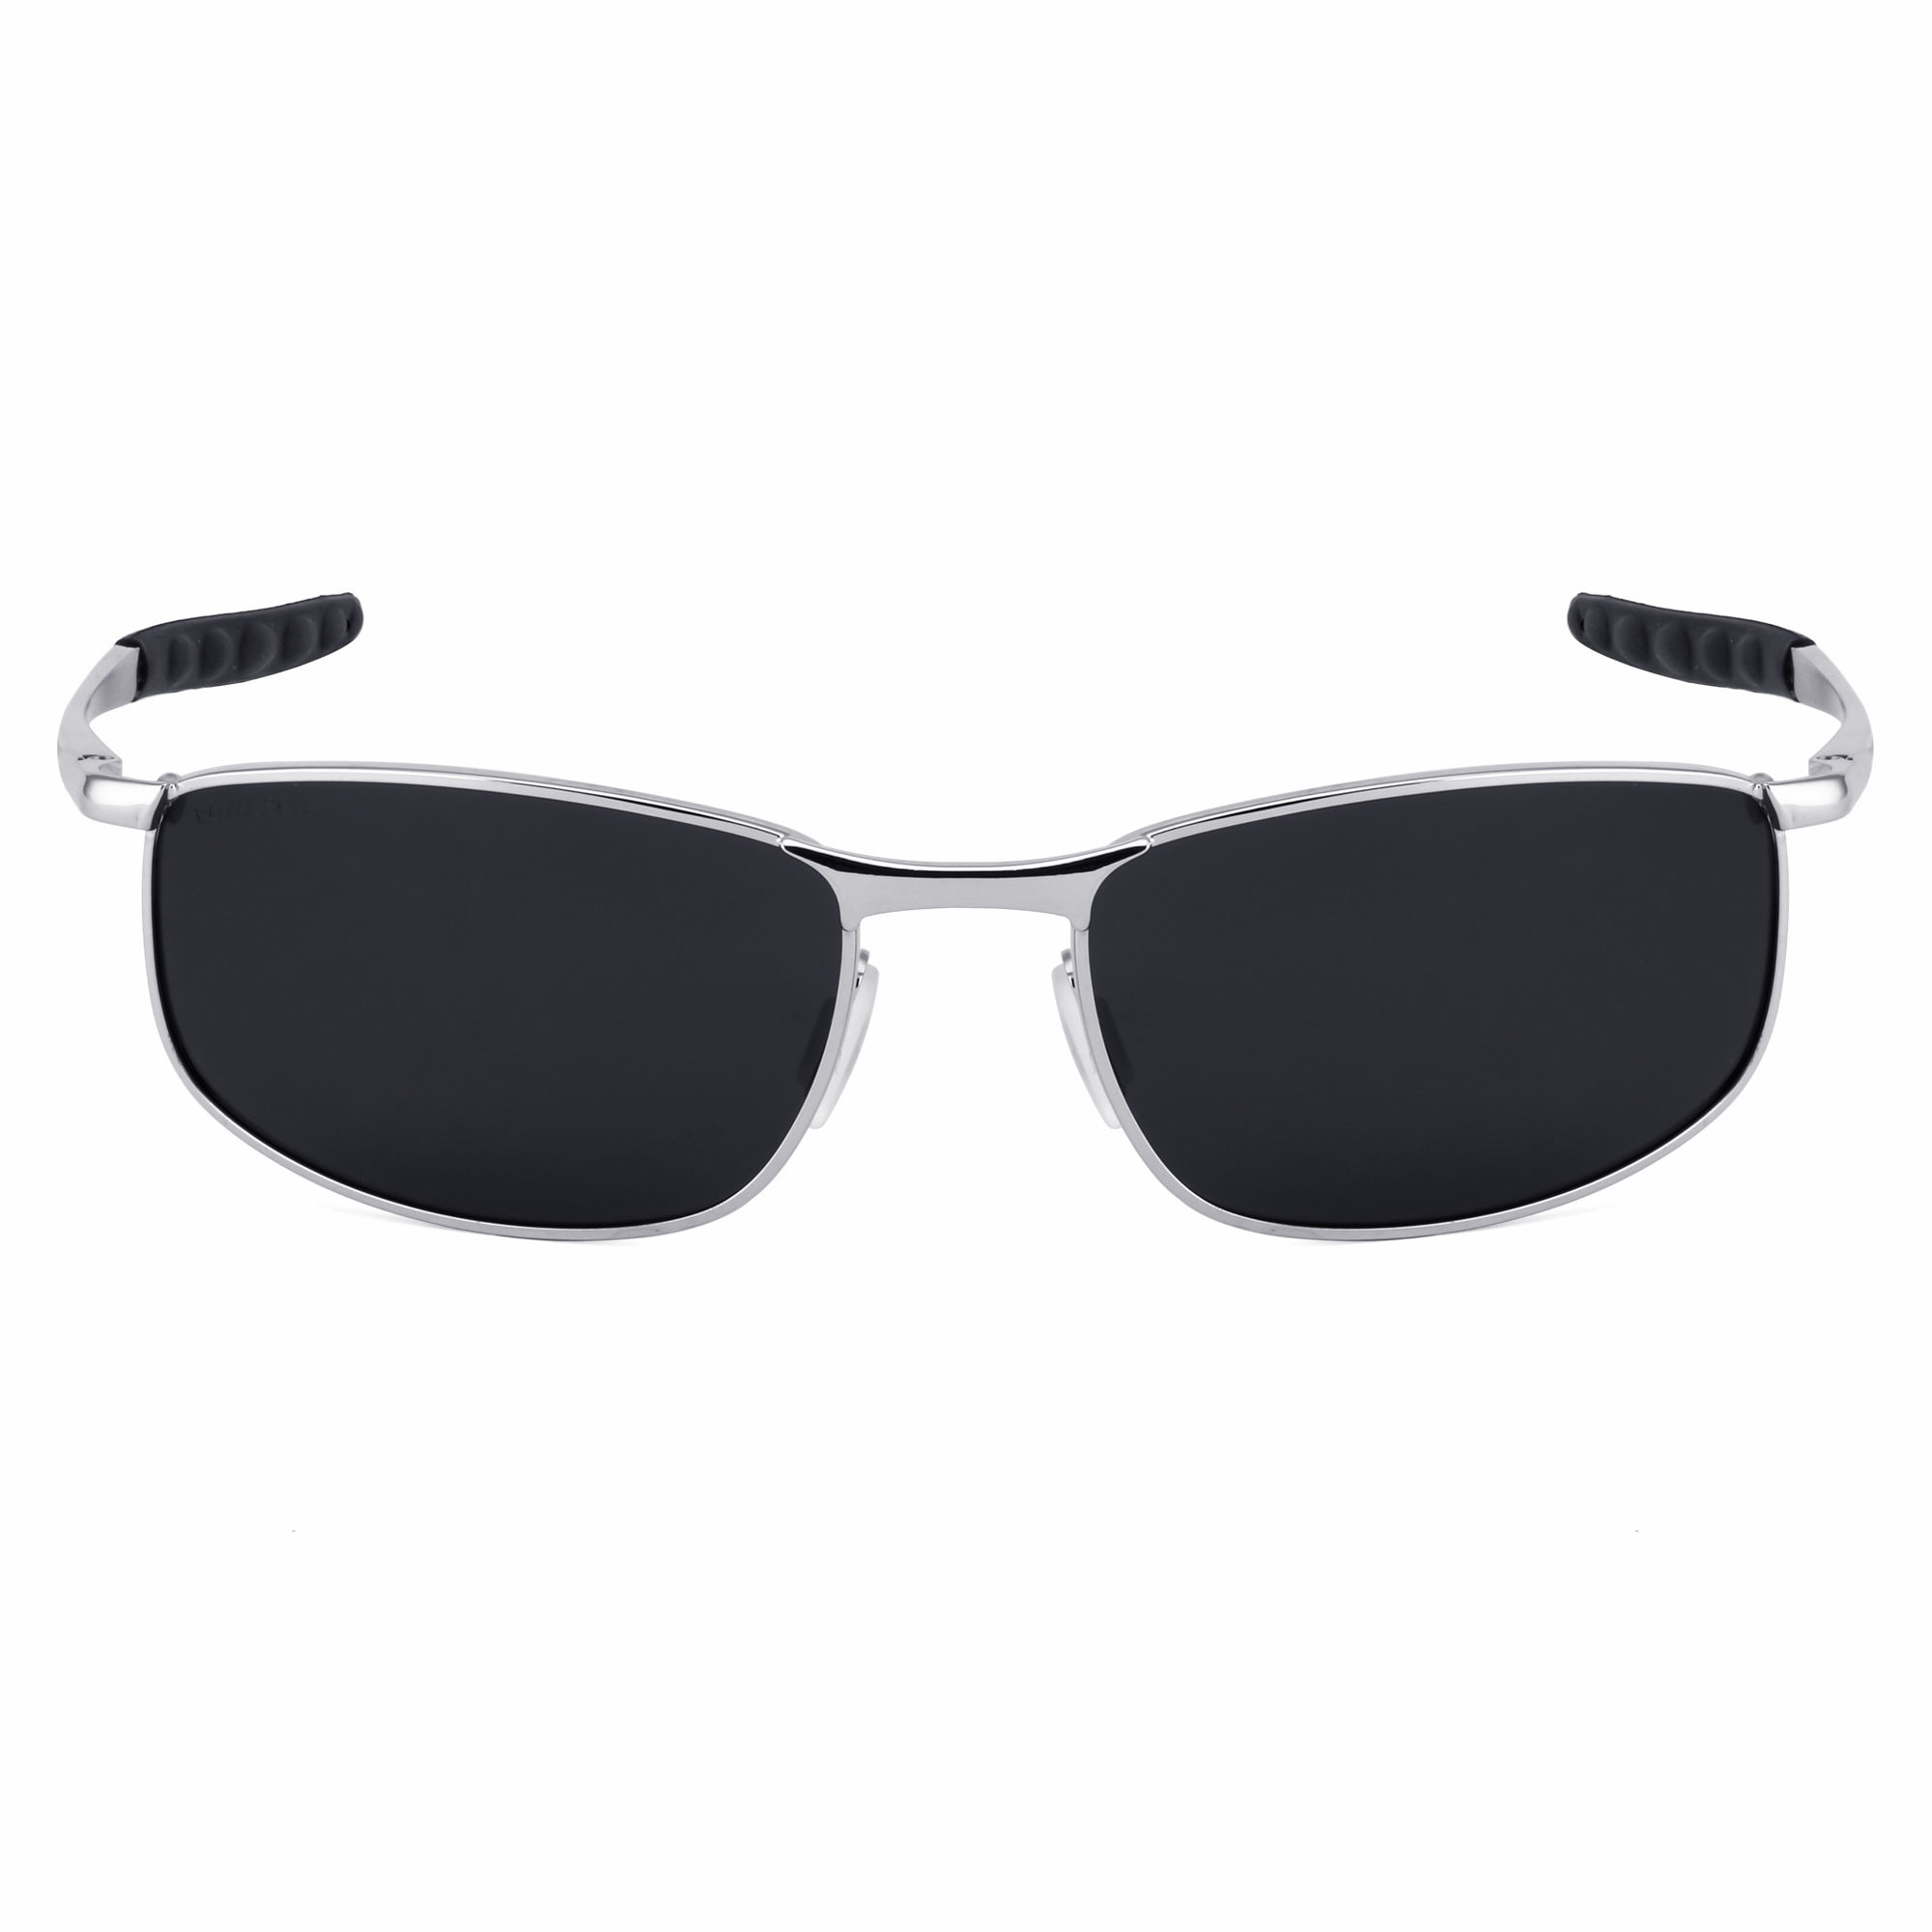 Buy Sports Sunglasses at Best Price on FunkyTradition